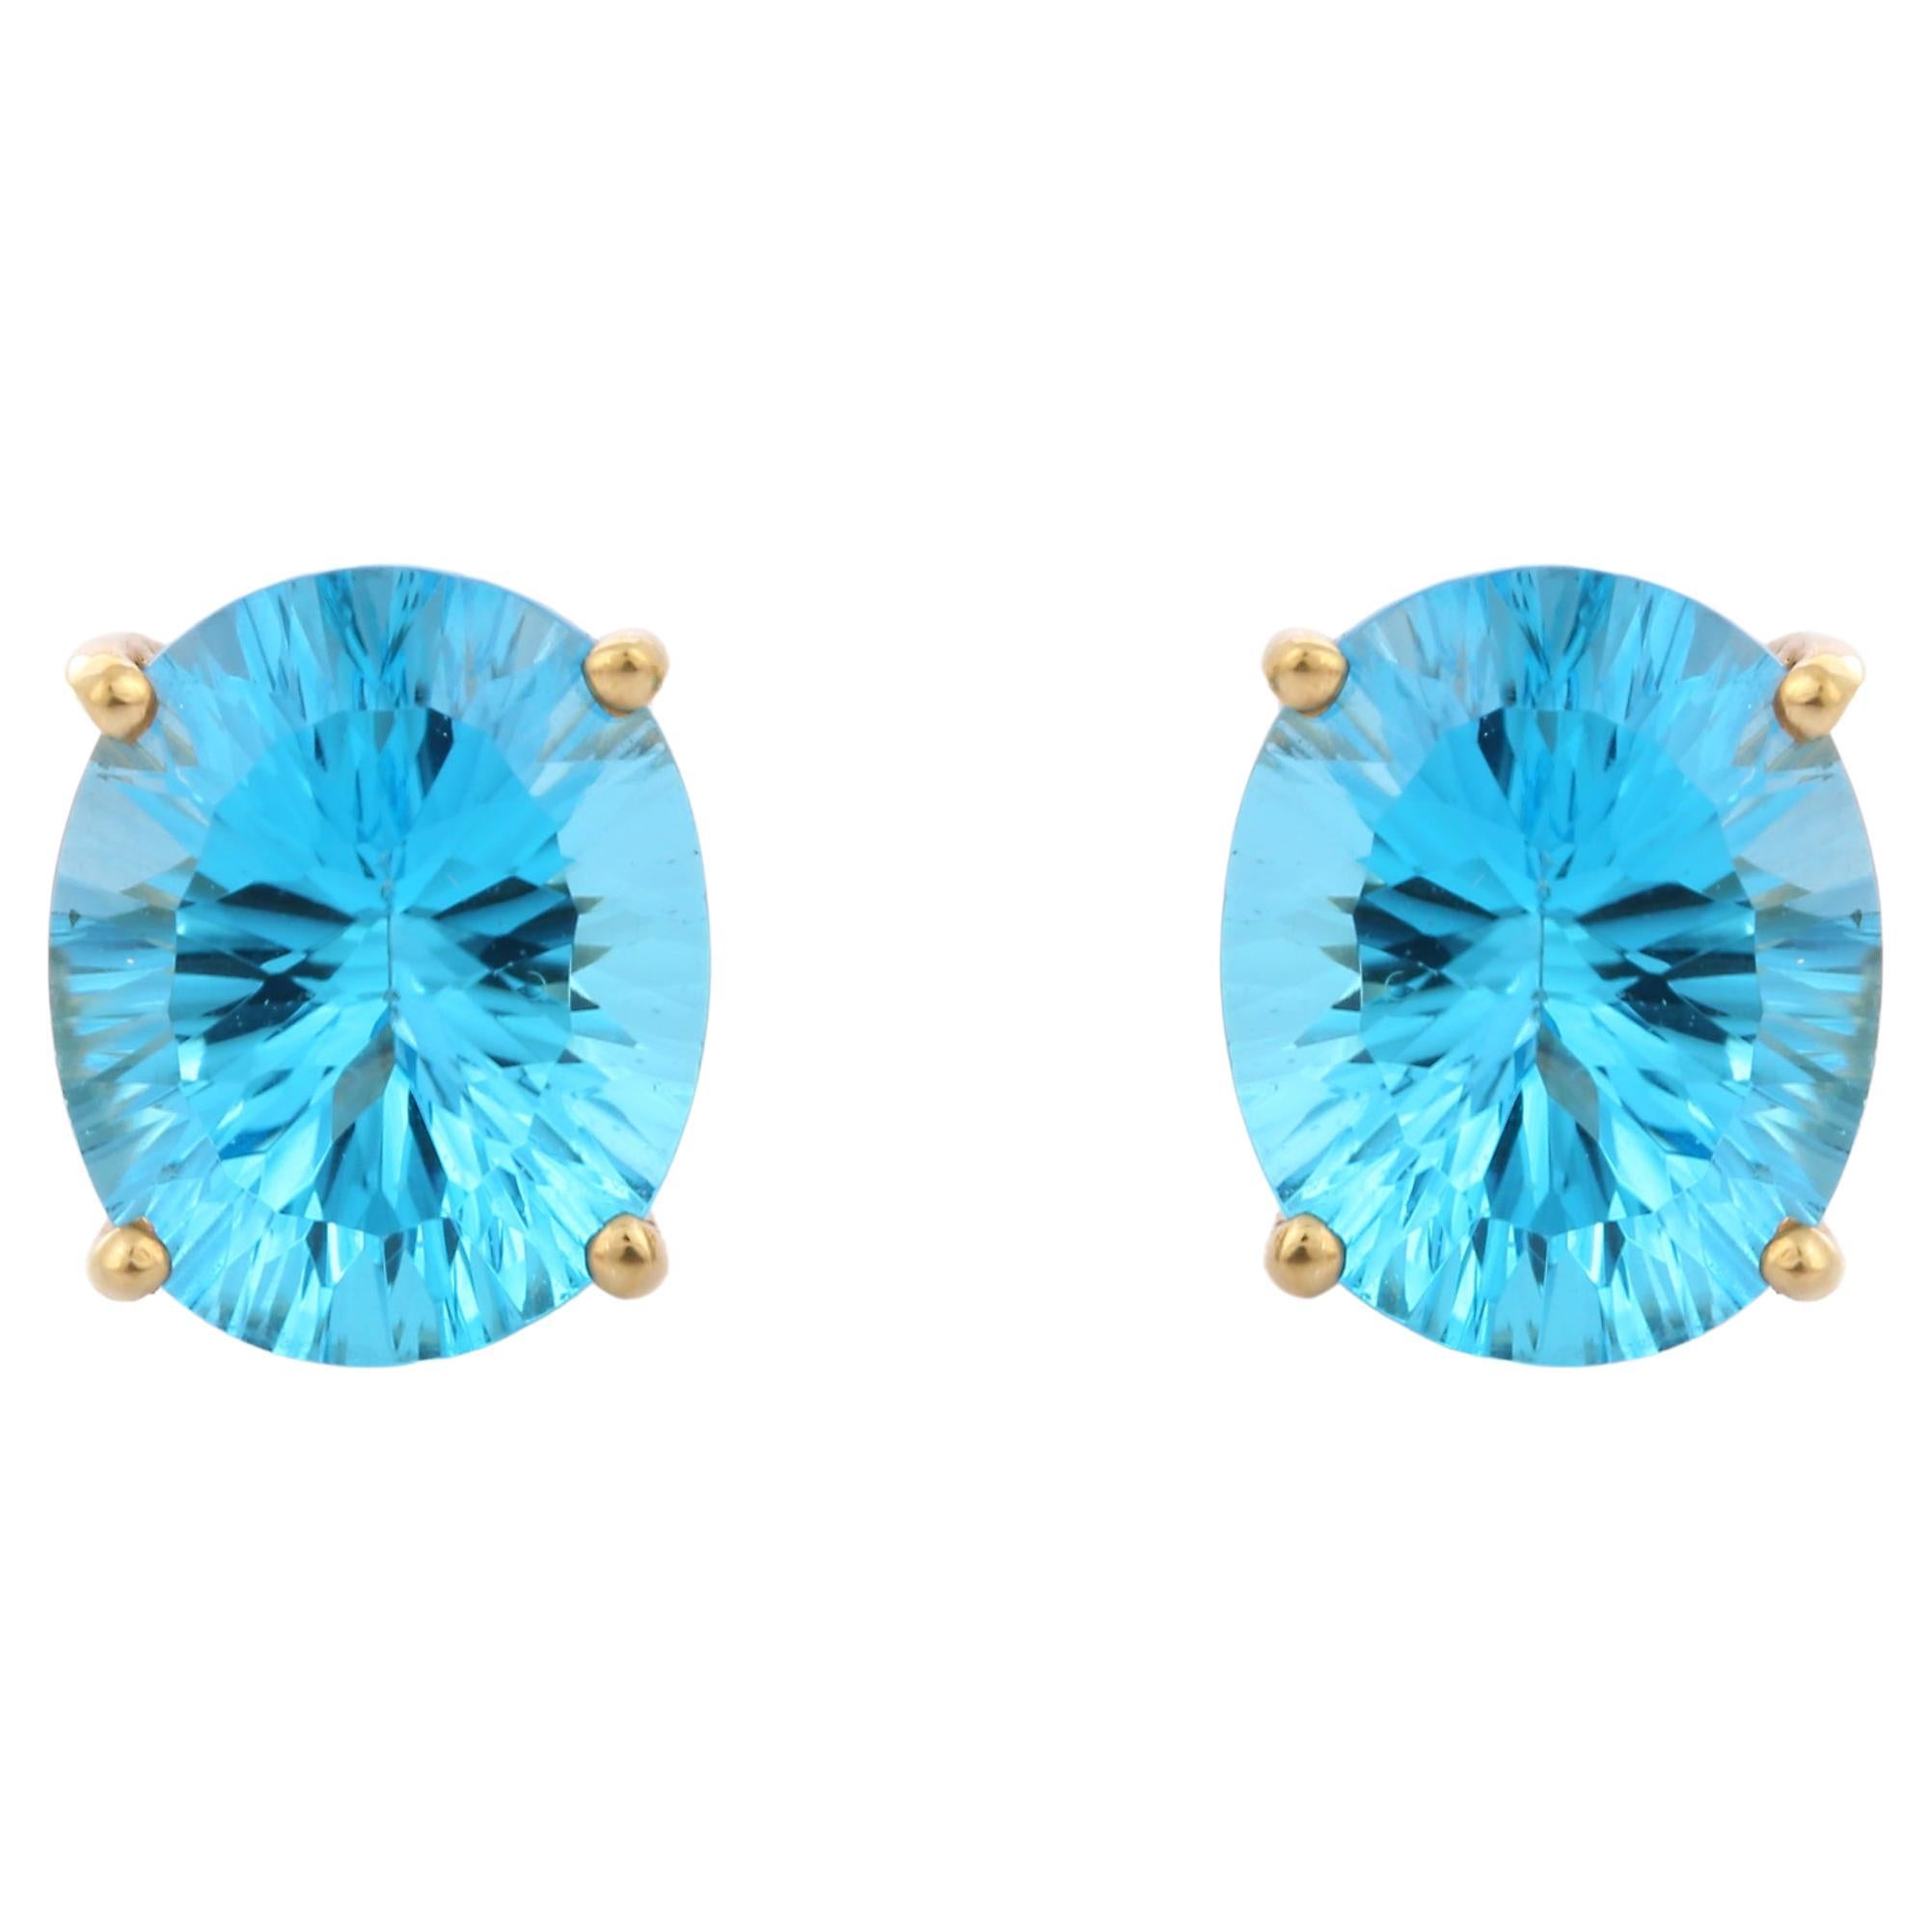 11 Ct Natural Blue Topaz Solitaire Stud Earrings Everyday Earrings in 10K Gold